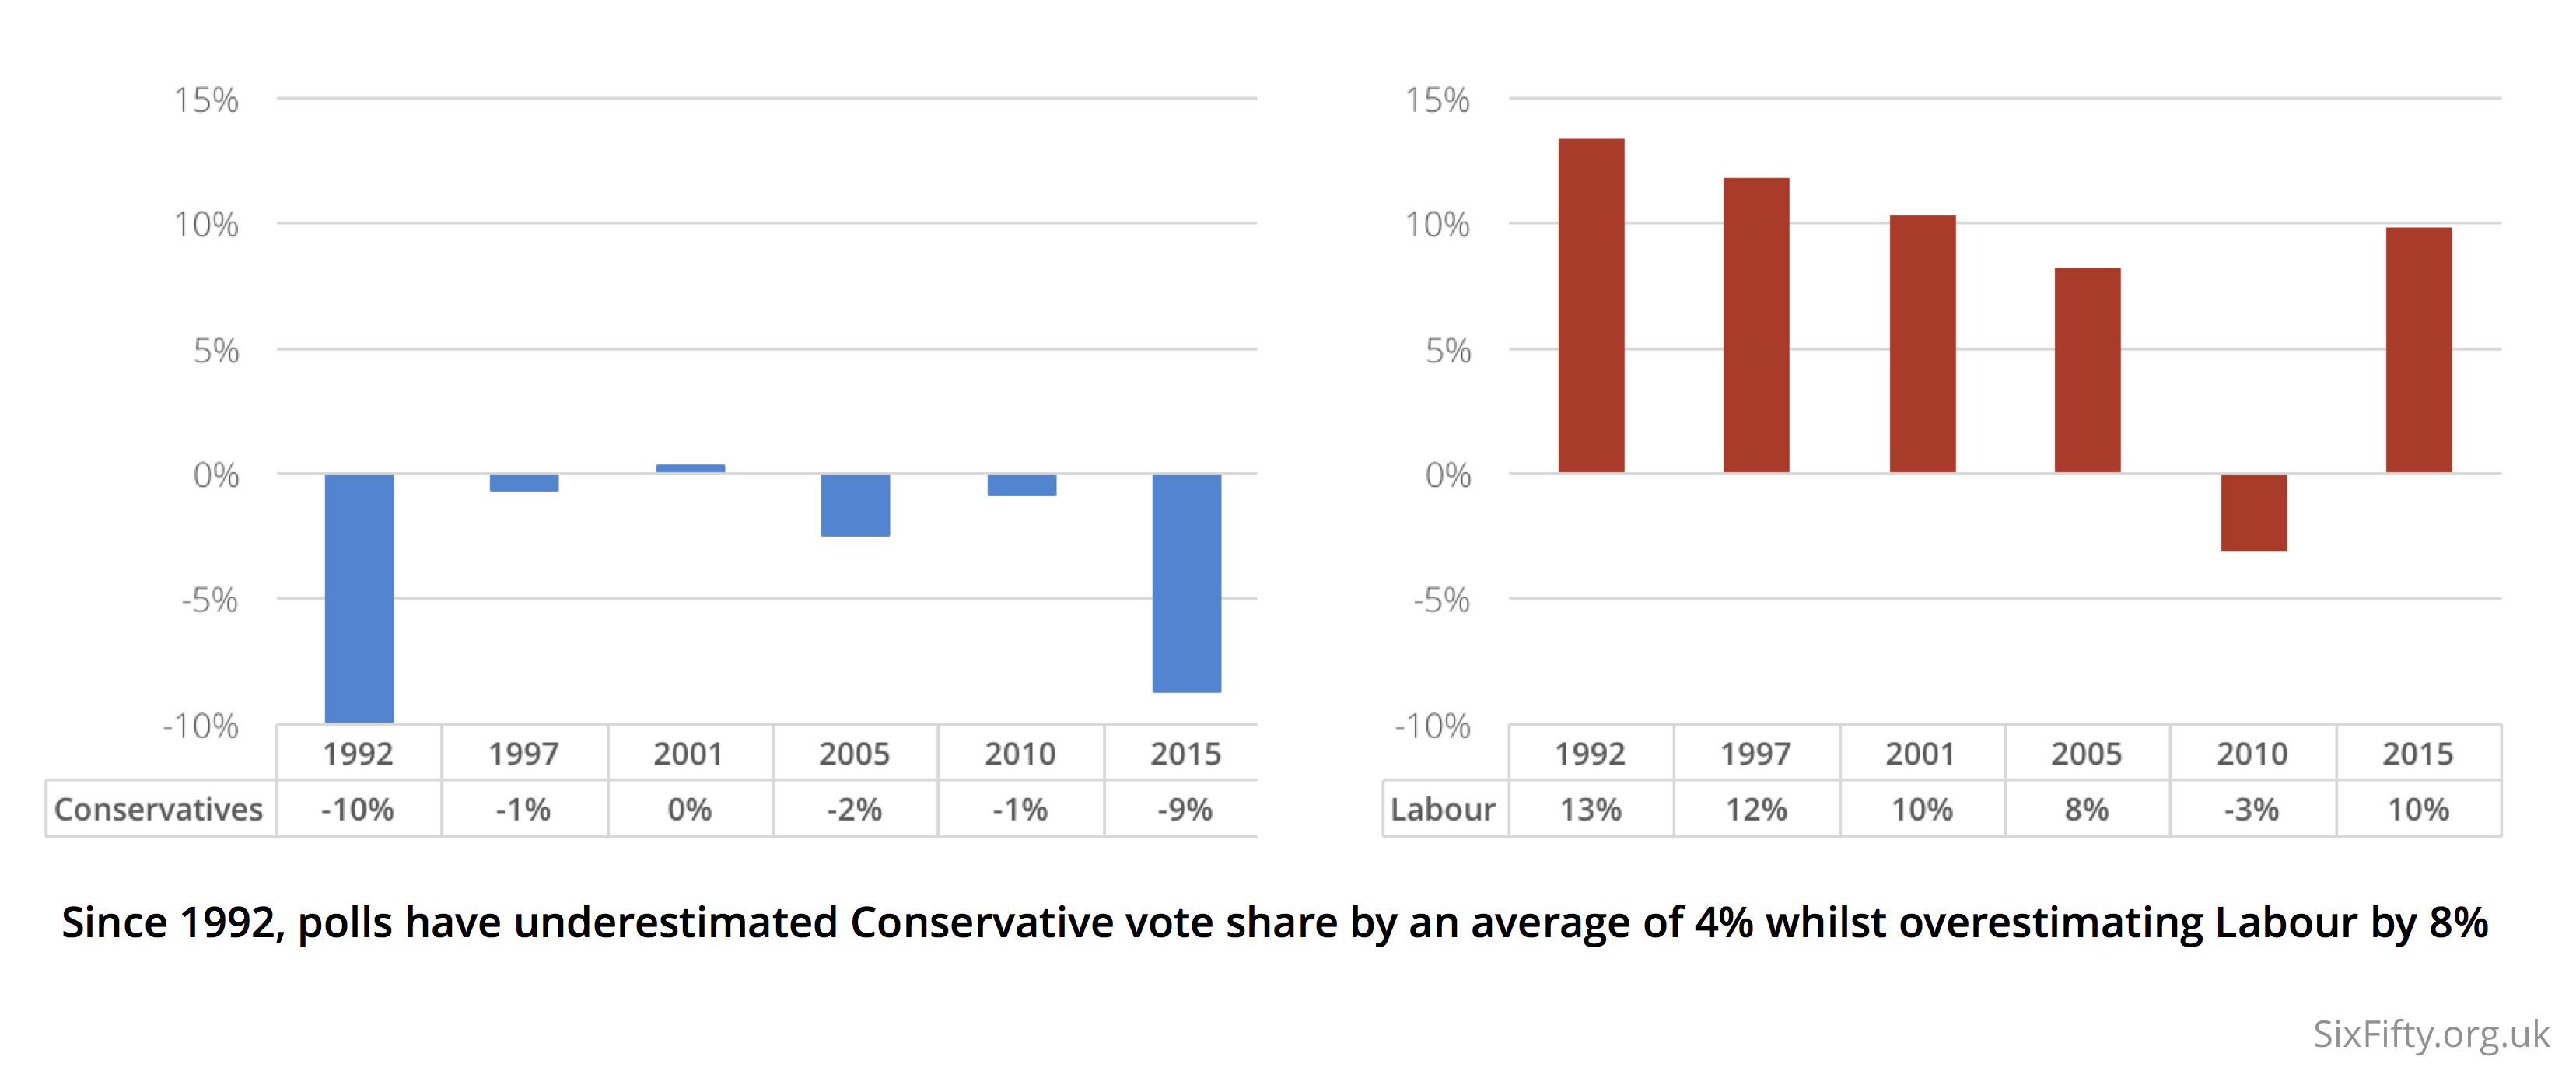 Polling averages prior to each of the last six general elections has favoured Labour over Conservatives